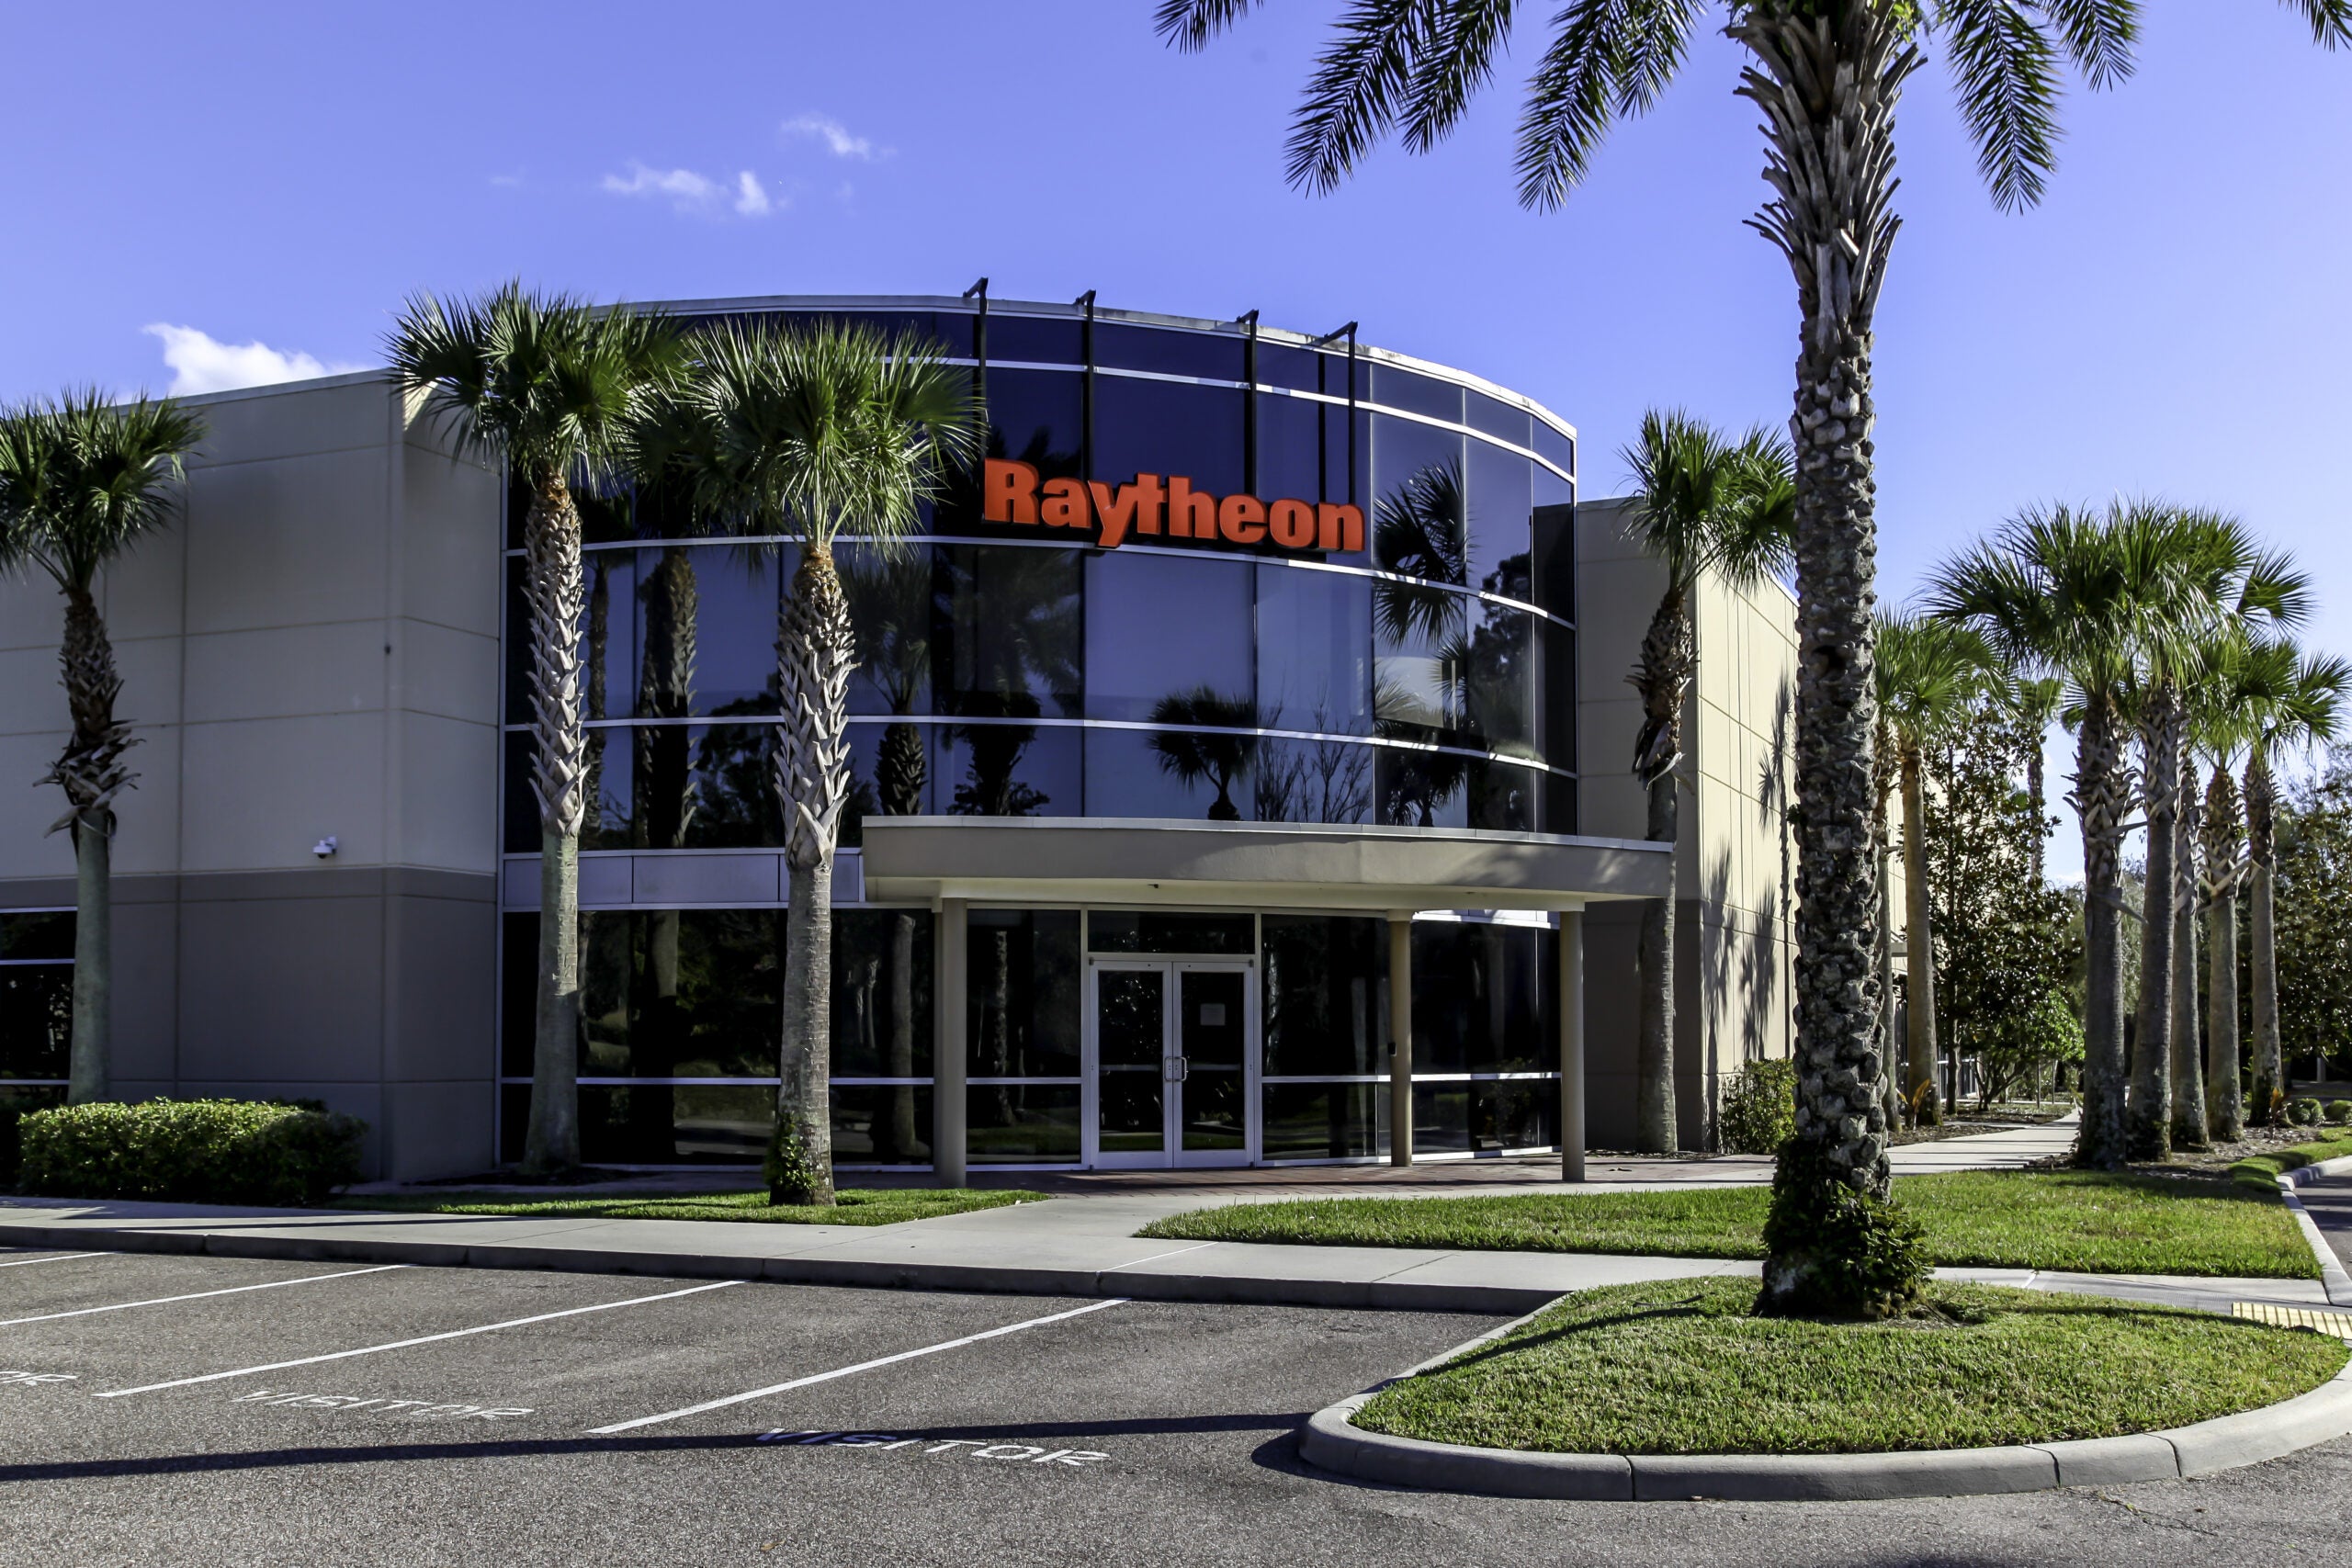 Raytheon Names Christoper Calio Chief Operating Officer